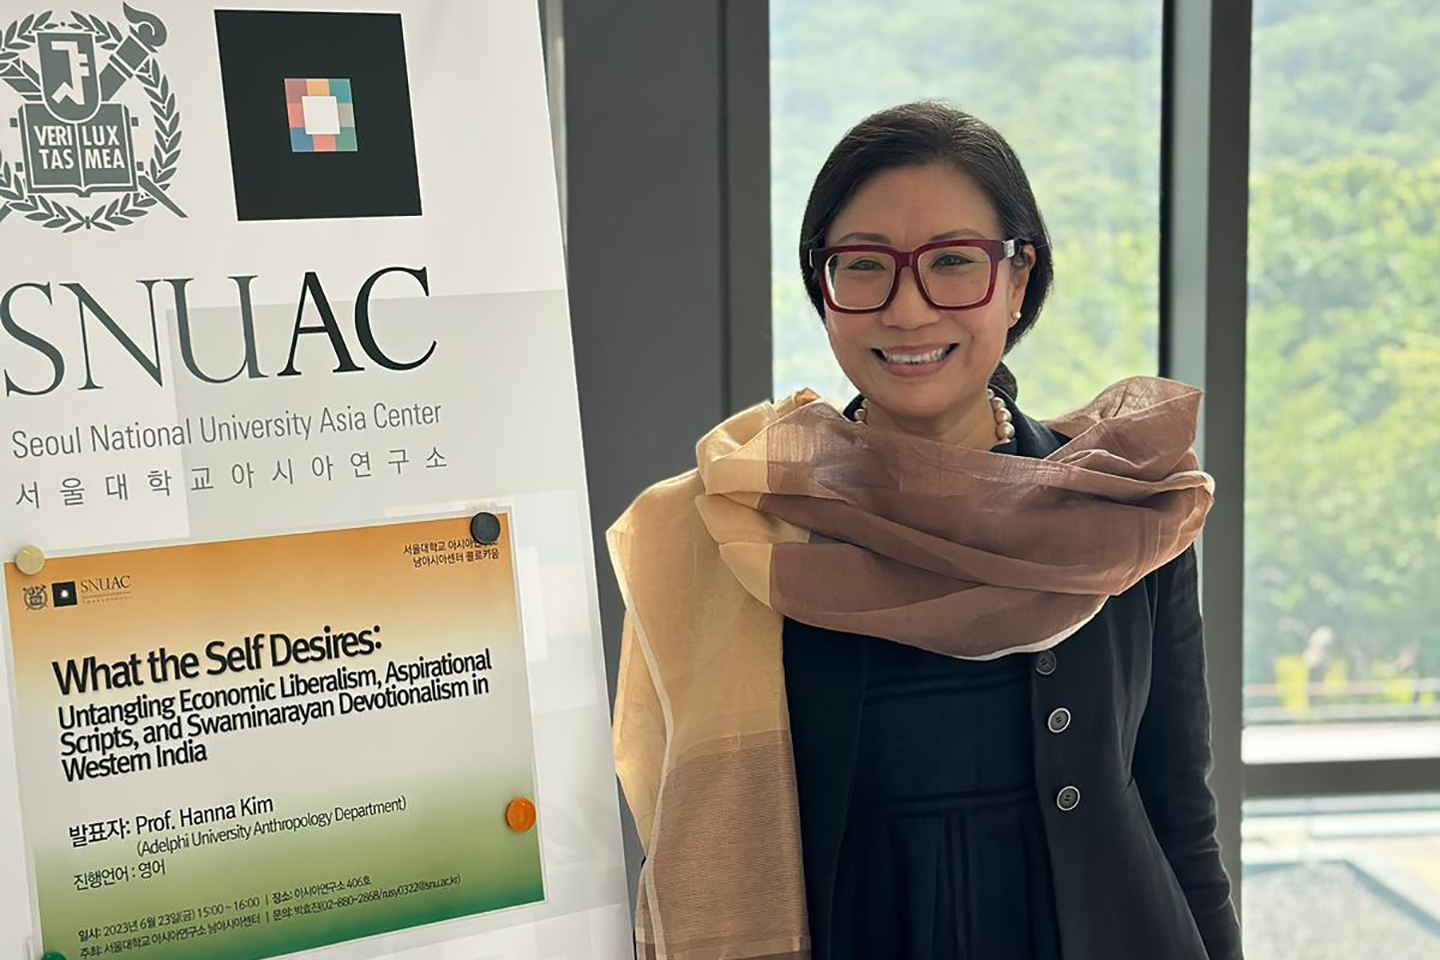 Professor Hanna Kim, wearing large red framed glasses stands to the right in front of a window. She is smiling. Next to her is a large sign containing a description of a led discussion.